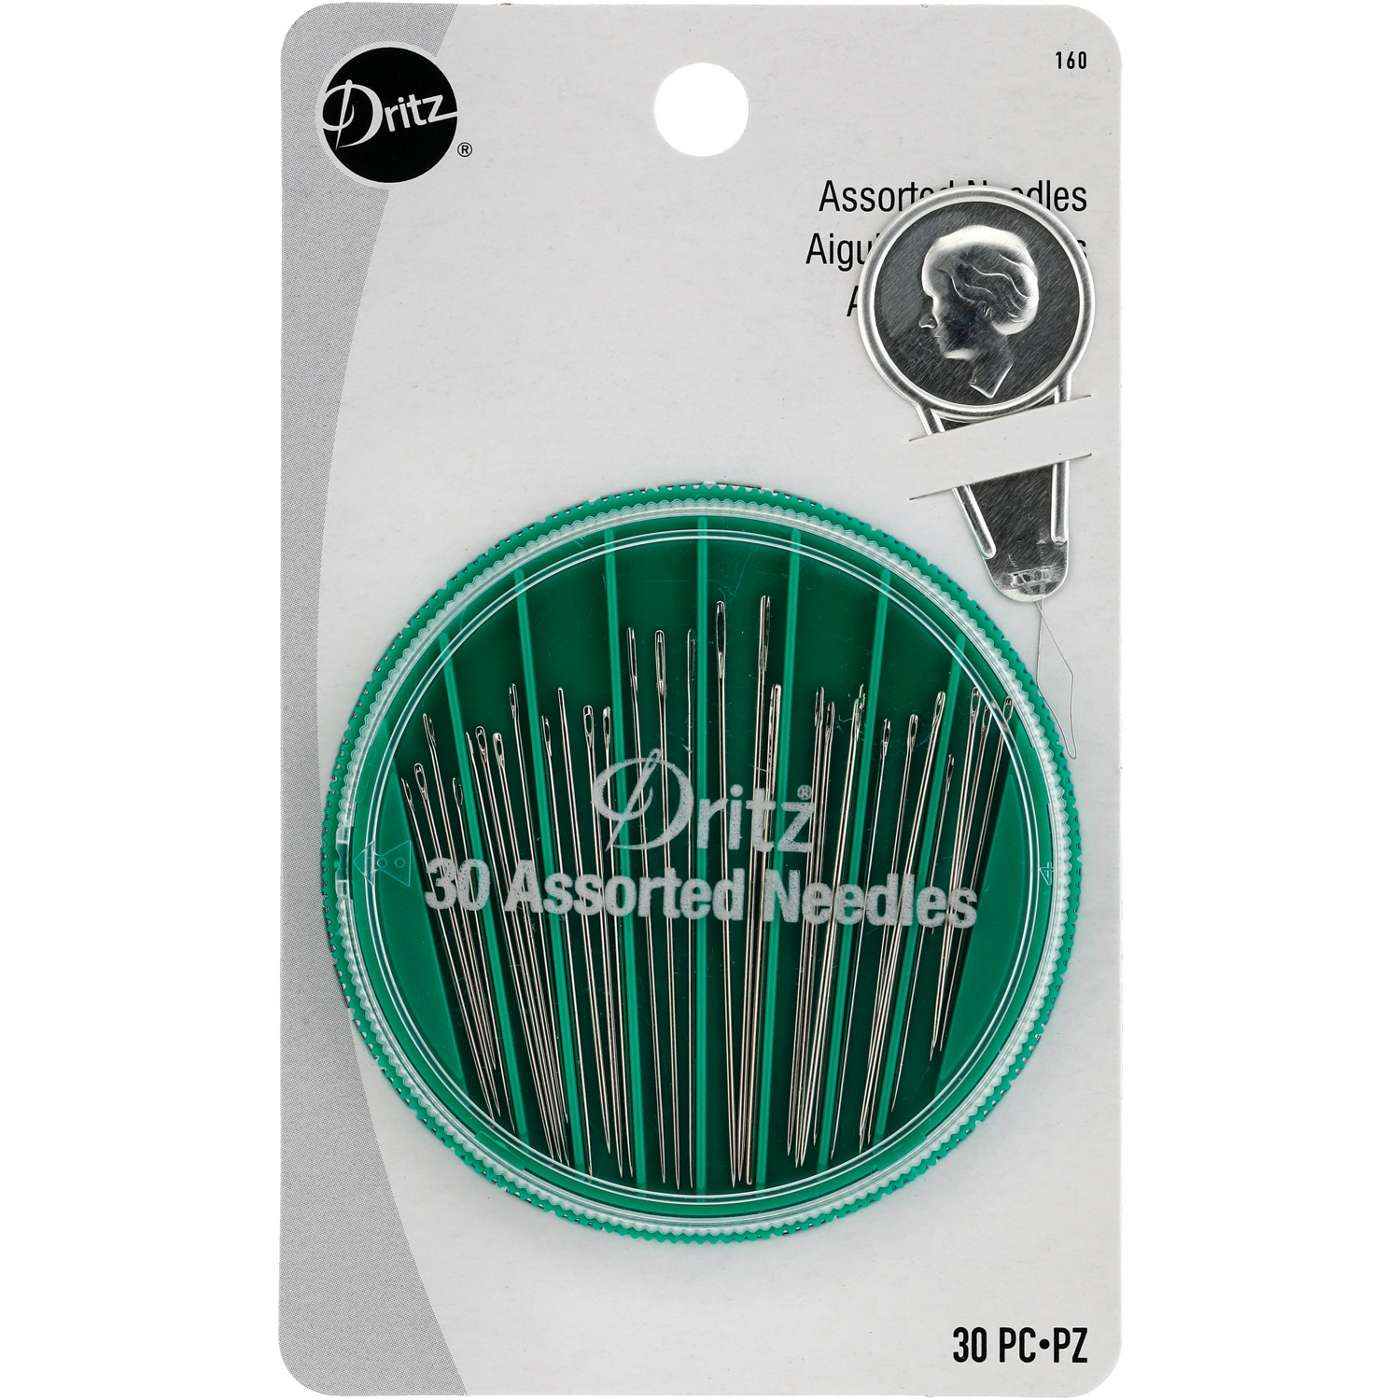 Dritz Assorted Sewing Needles; image 1 of 2